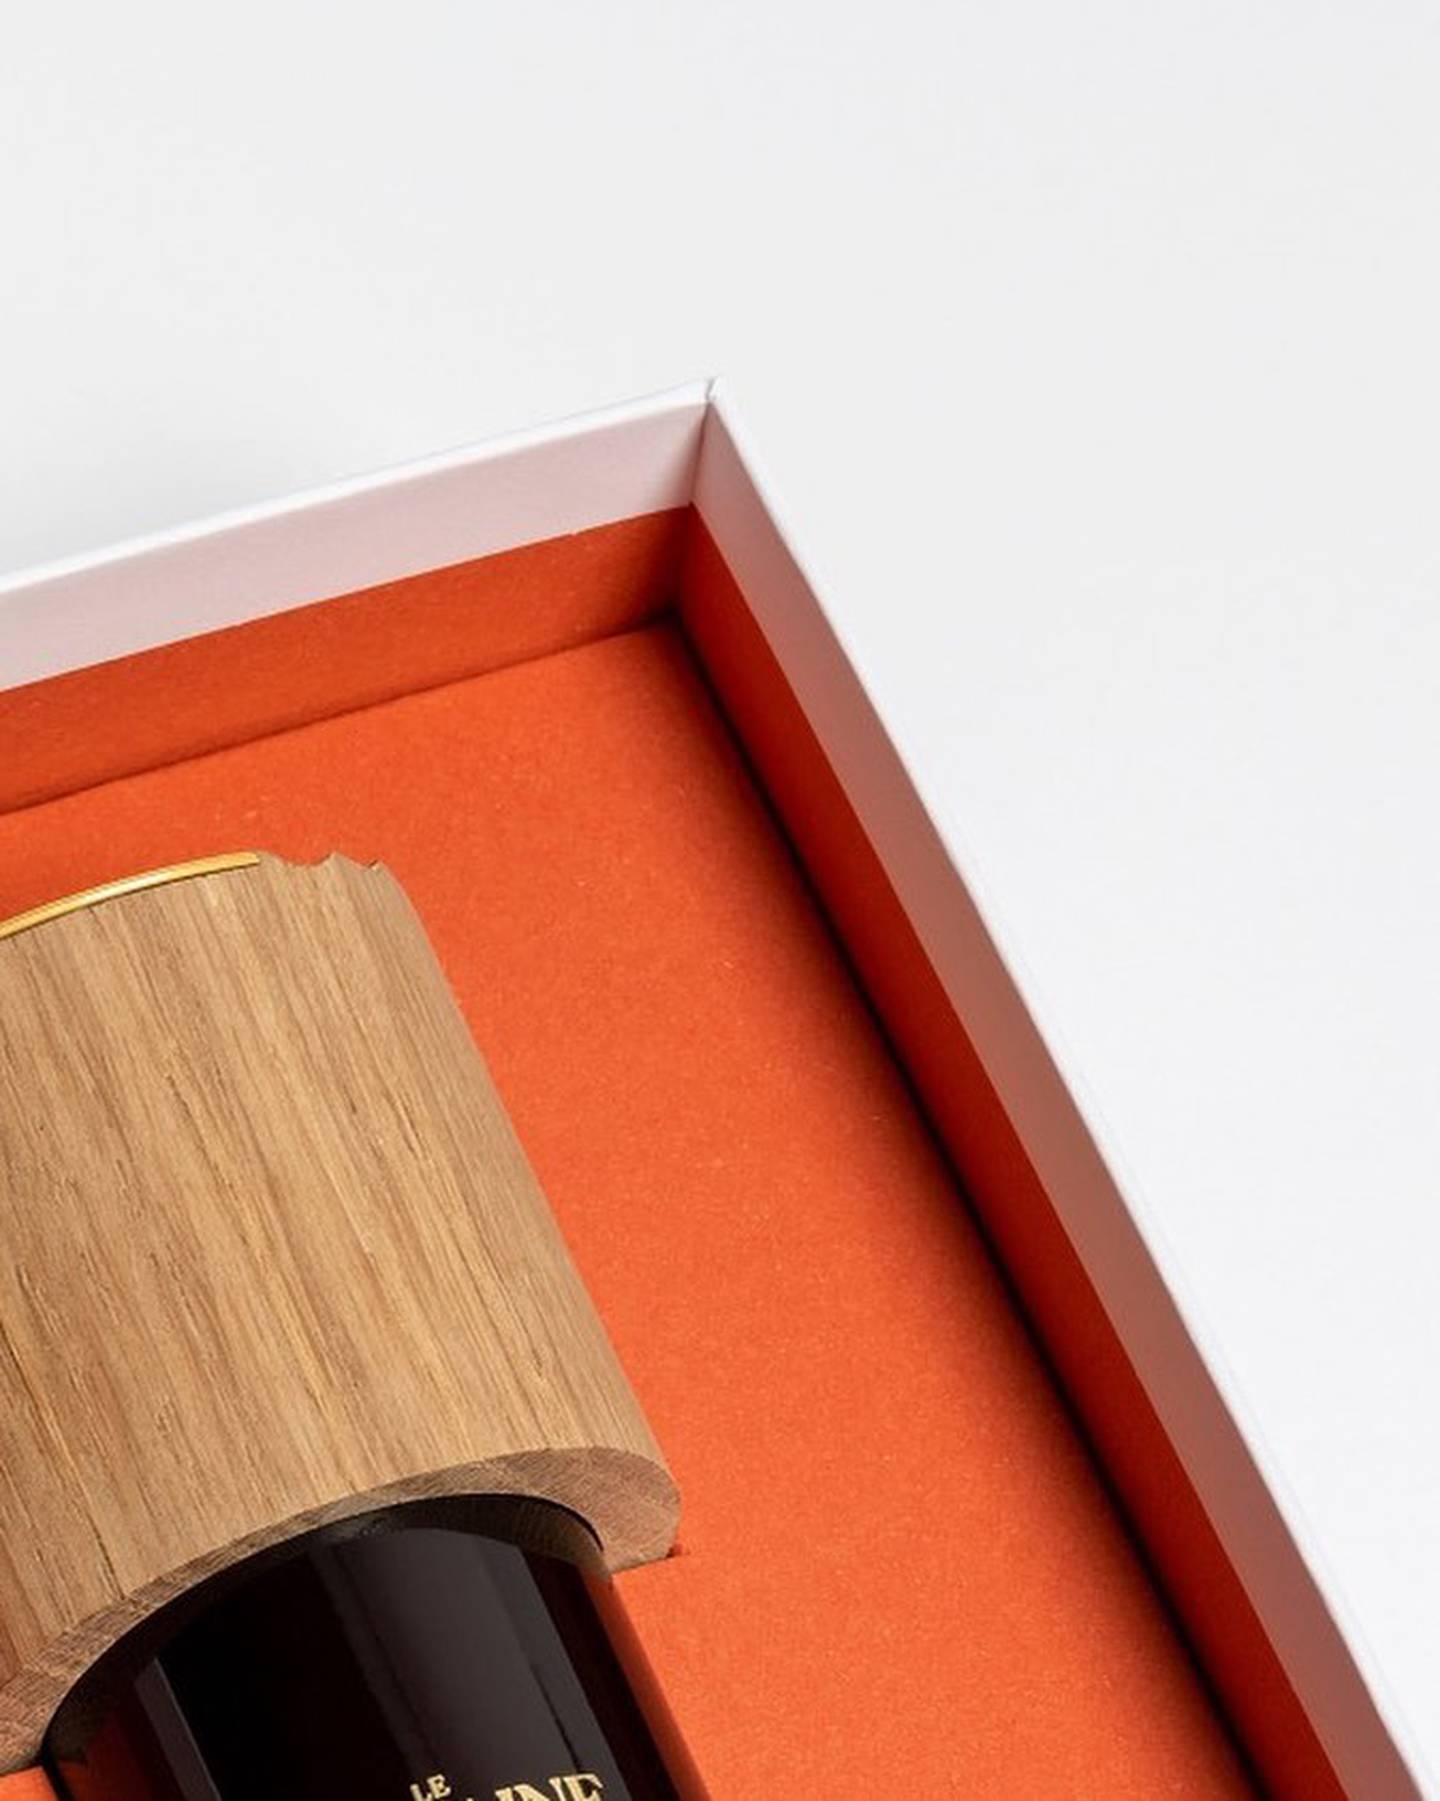 All products feature wooden caps recycled from old wine casks. Photo: Le Domaine